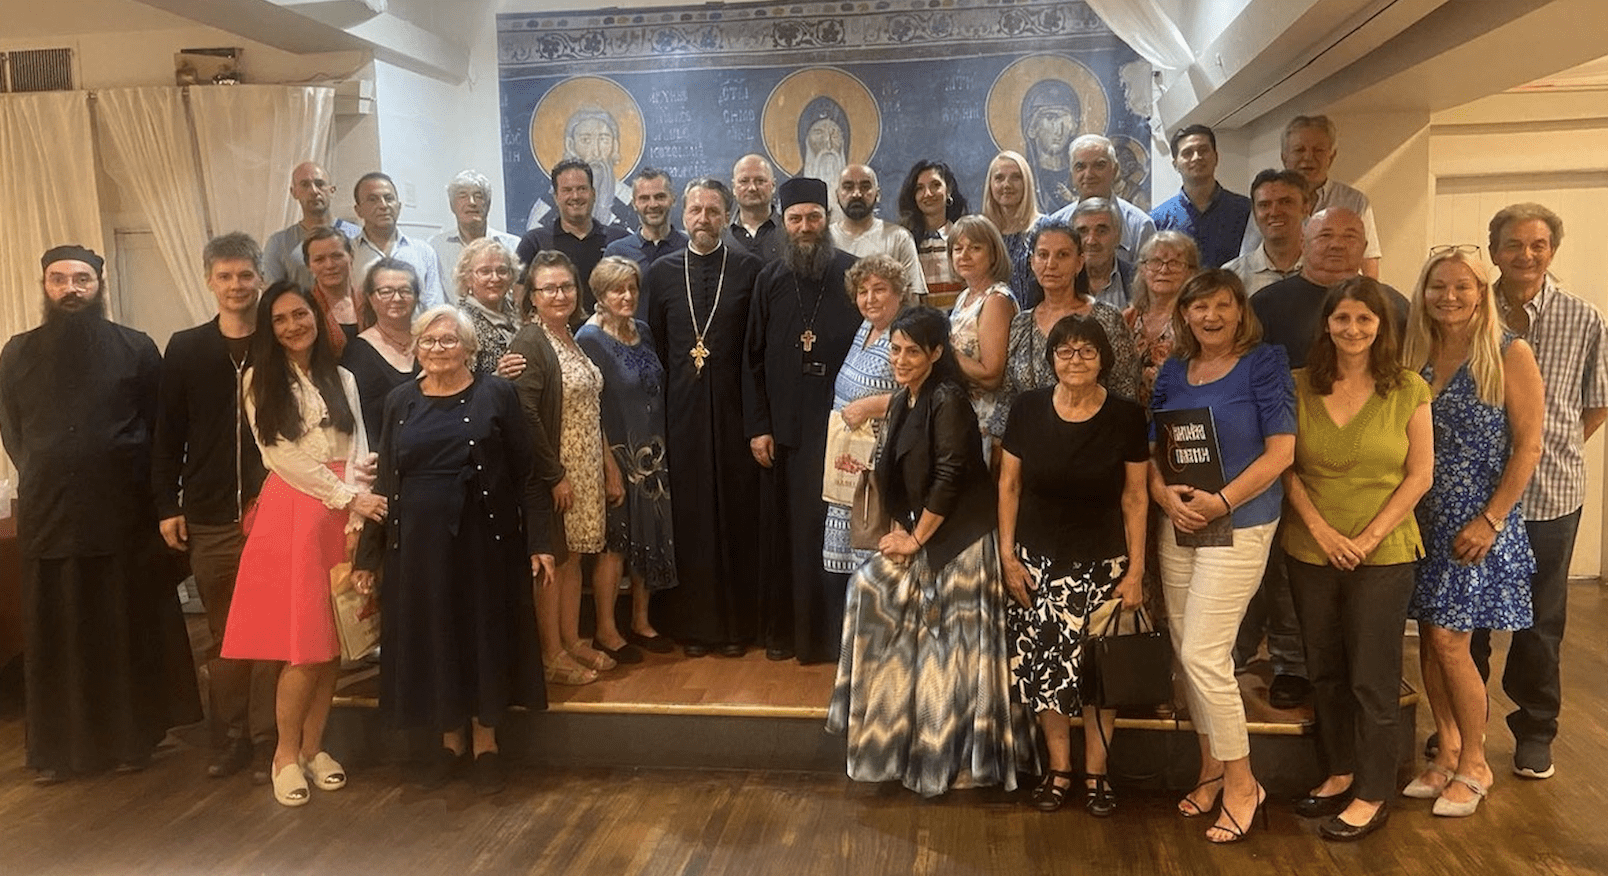 VISIT OF THE ABBOT OF THE HILANDAR MONASTERY TO THE NEW YORK PARISH